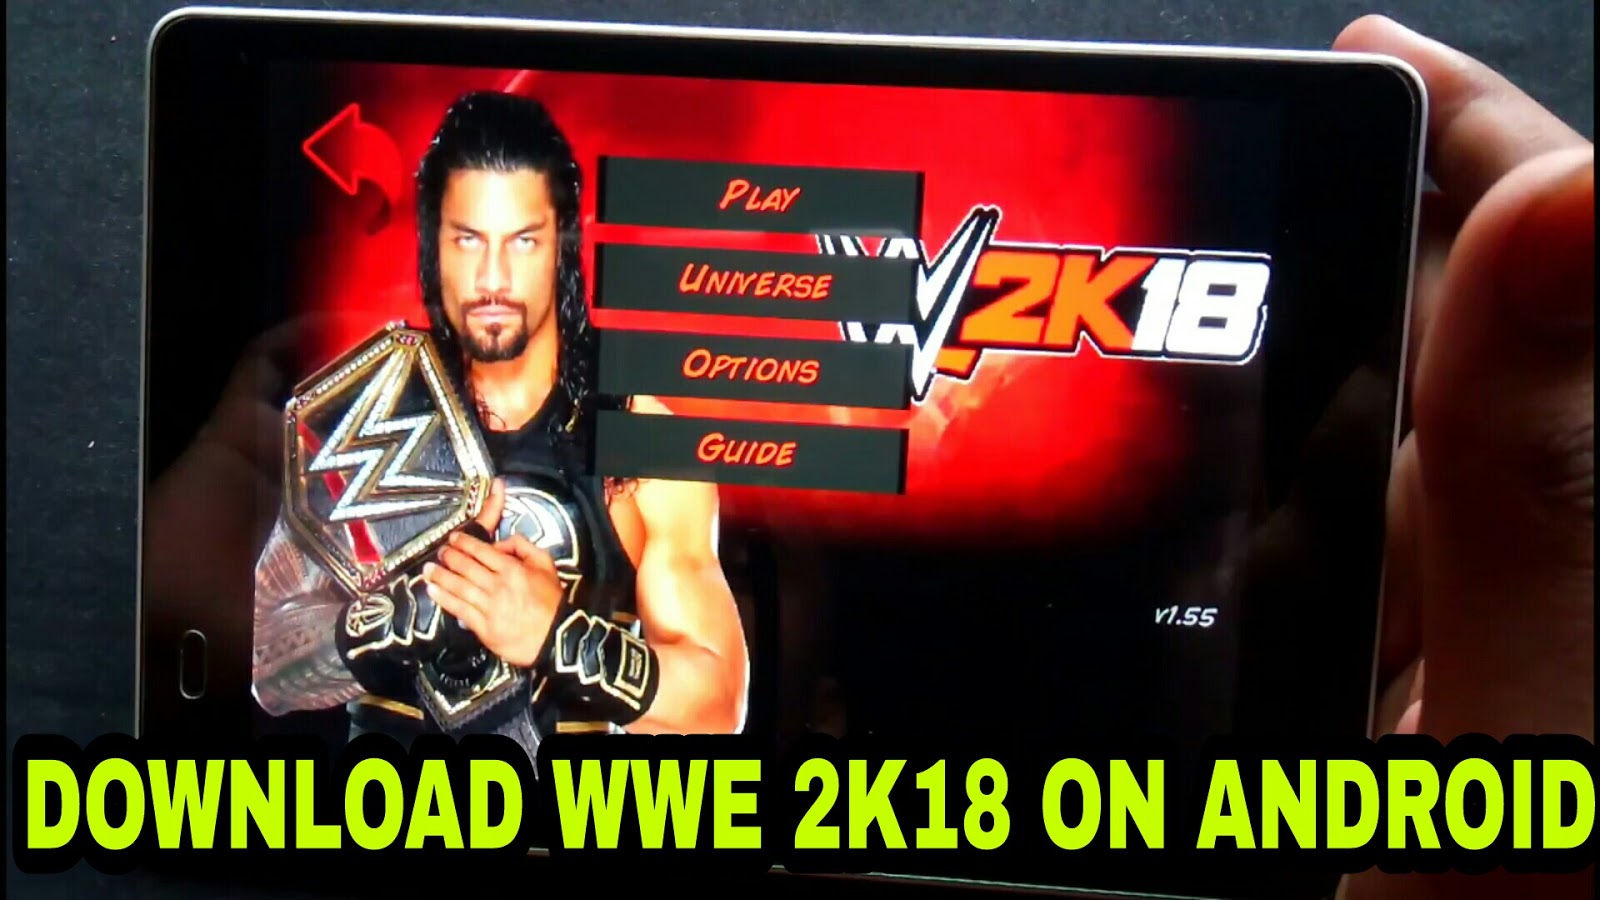 Wwe 2k18 Iso File Download For Ppsspp Jumprenew